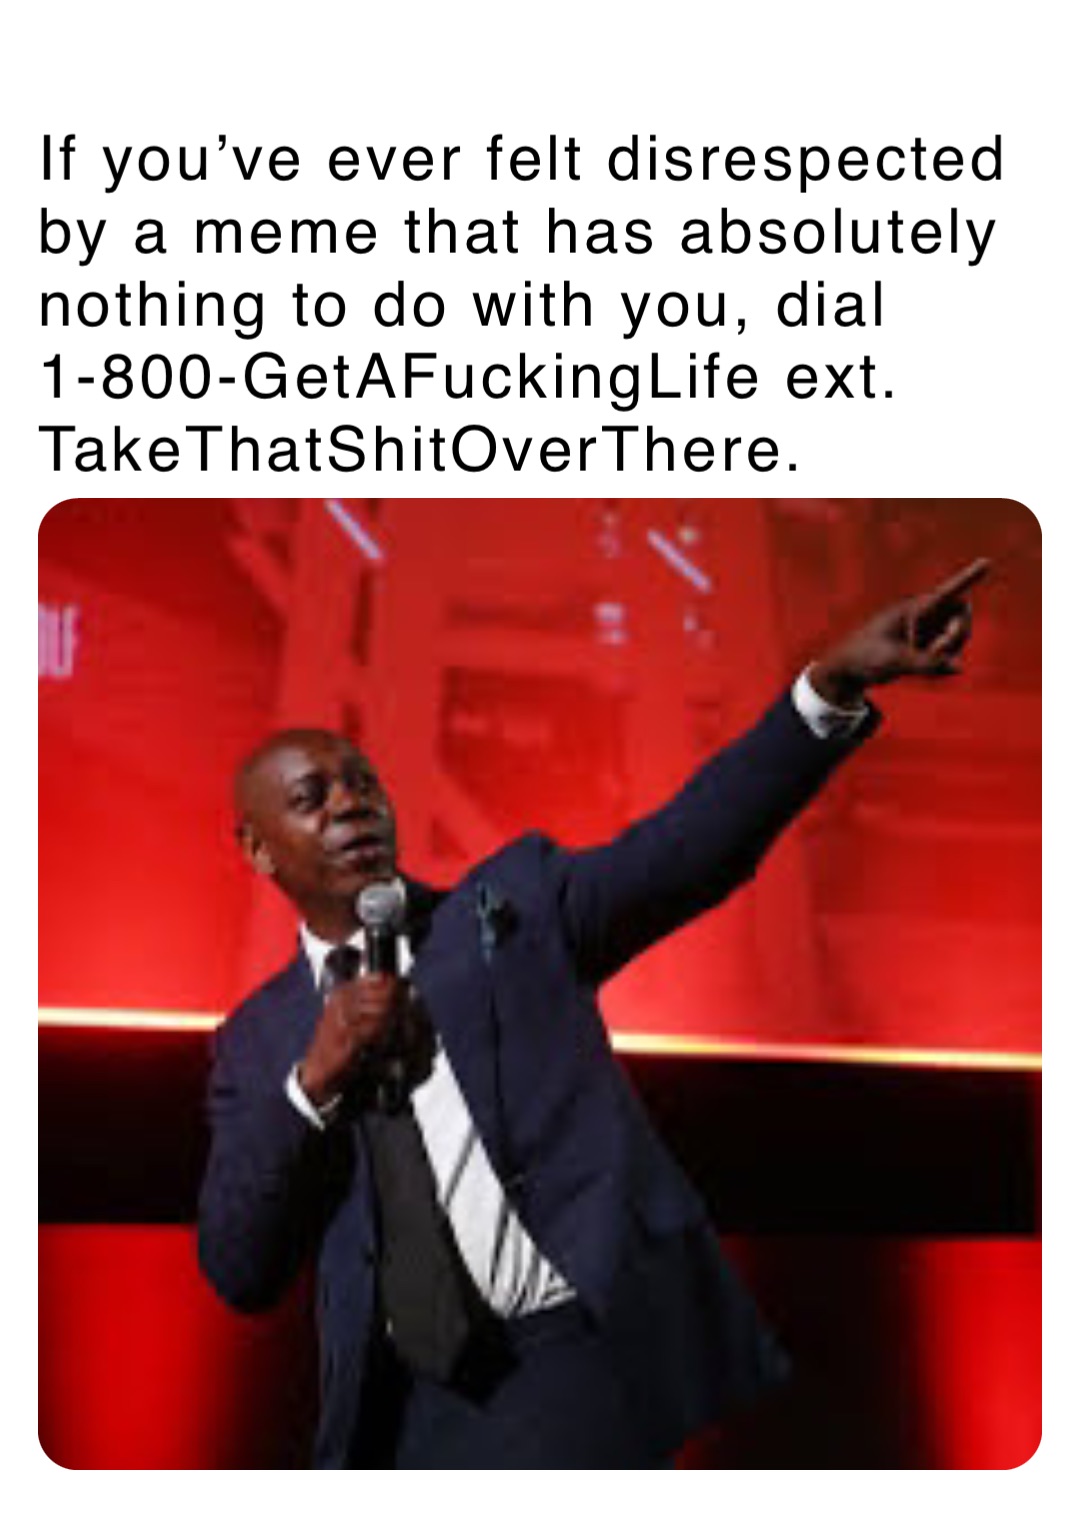 If you’ve ever felt disrespected by a meme that has absolutely nothing to do with you, dial 1-800-GetAFuckingLife ext. TakeThatShitOverThere.